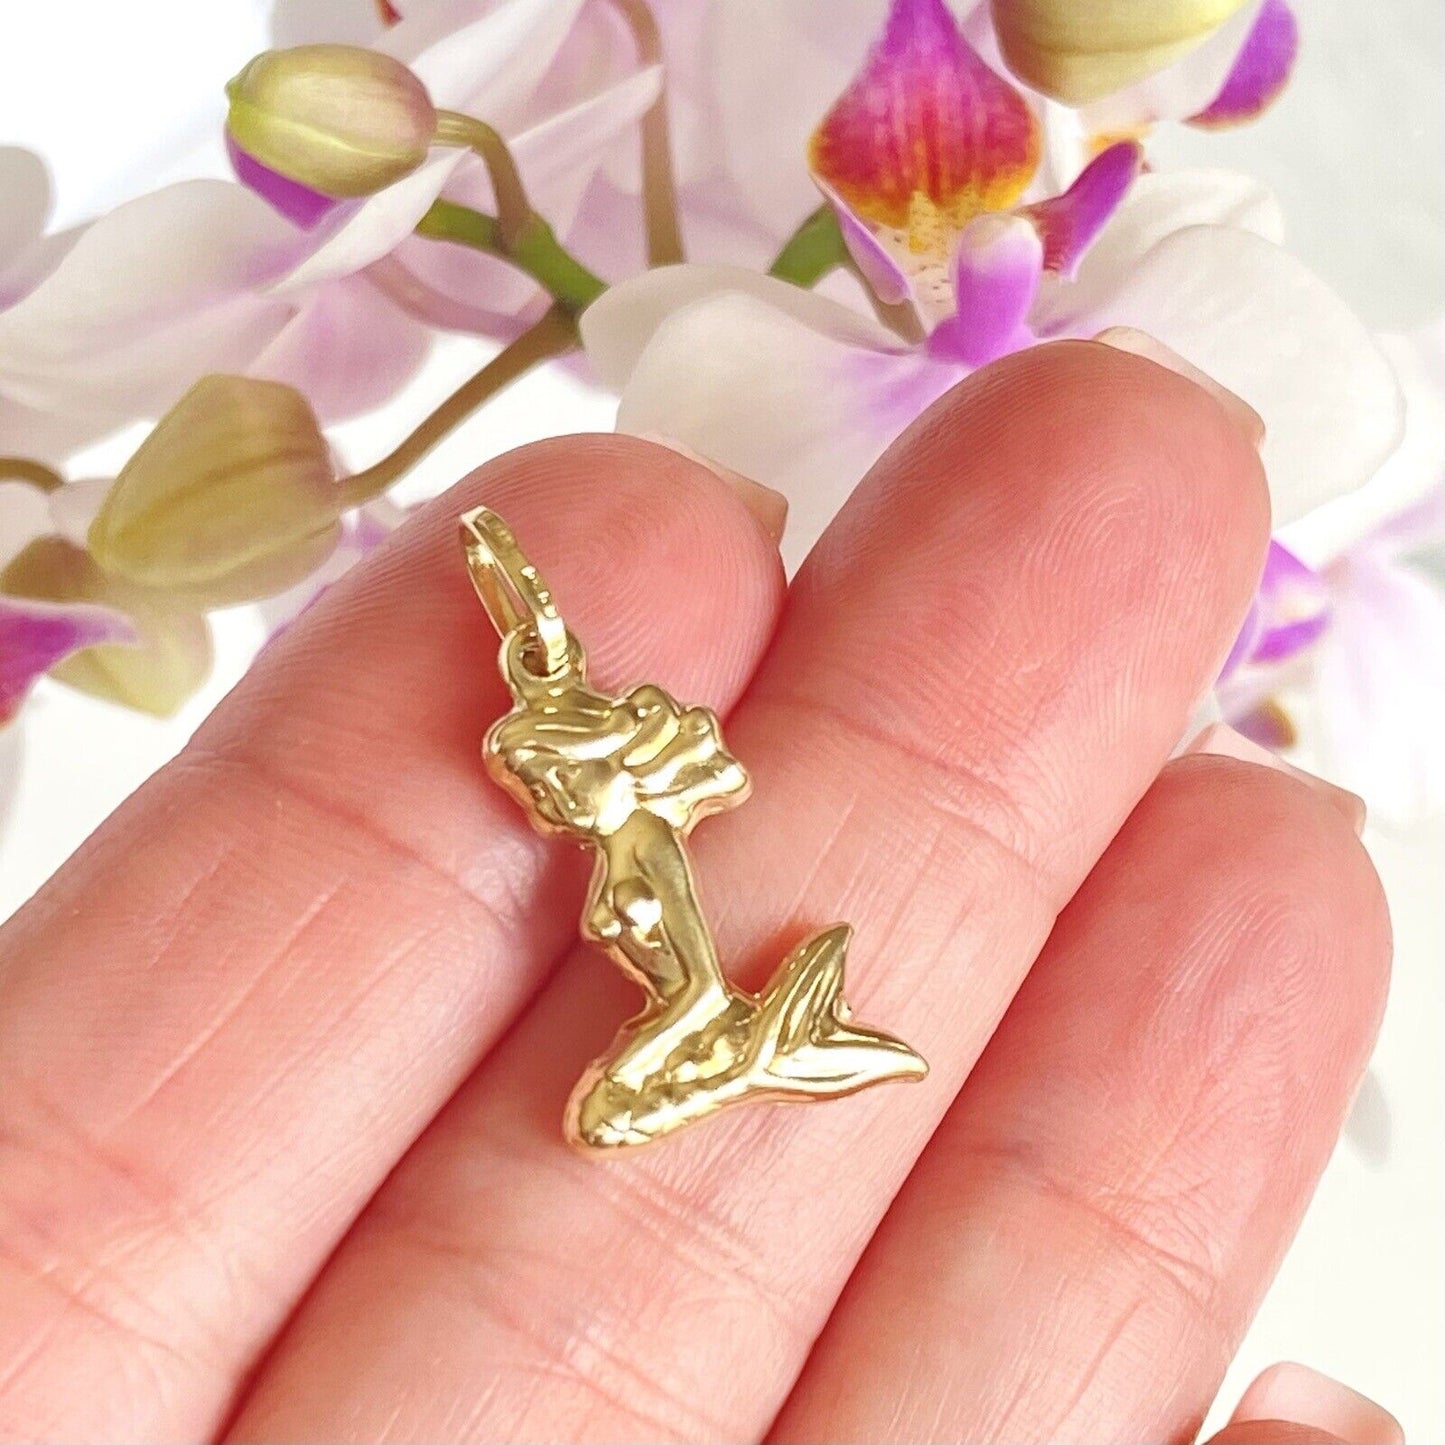 Adorable 14k Yellow Gold Puffy 3D Mermaid Pendant, New, 1.08"